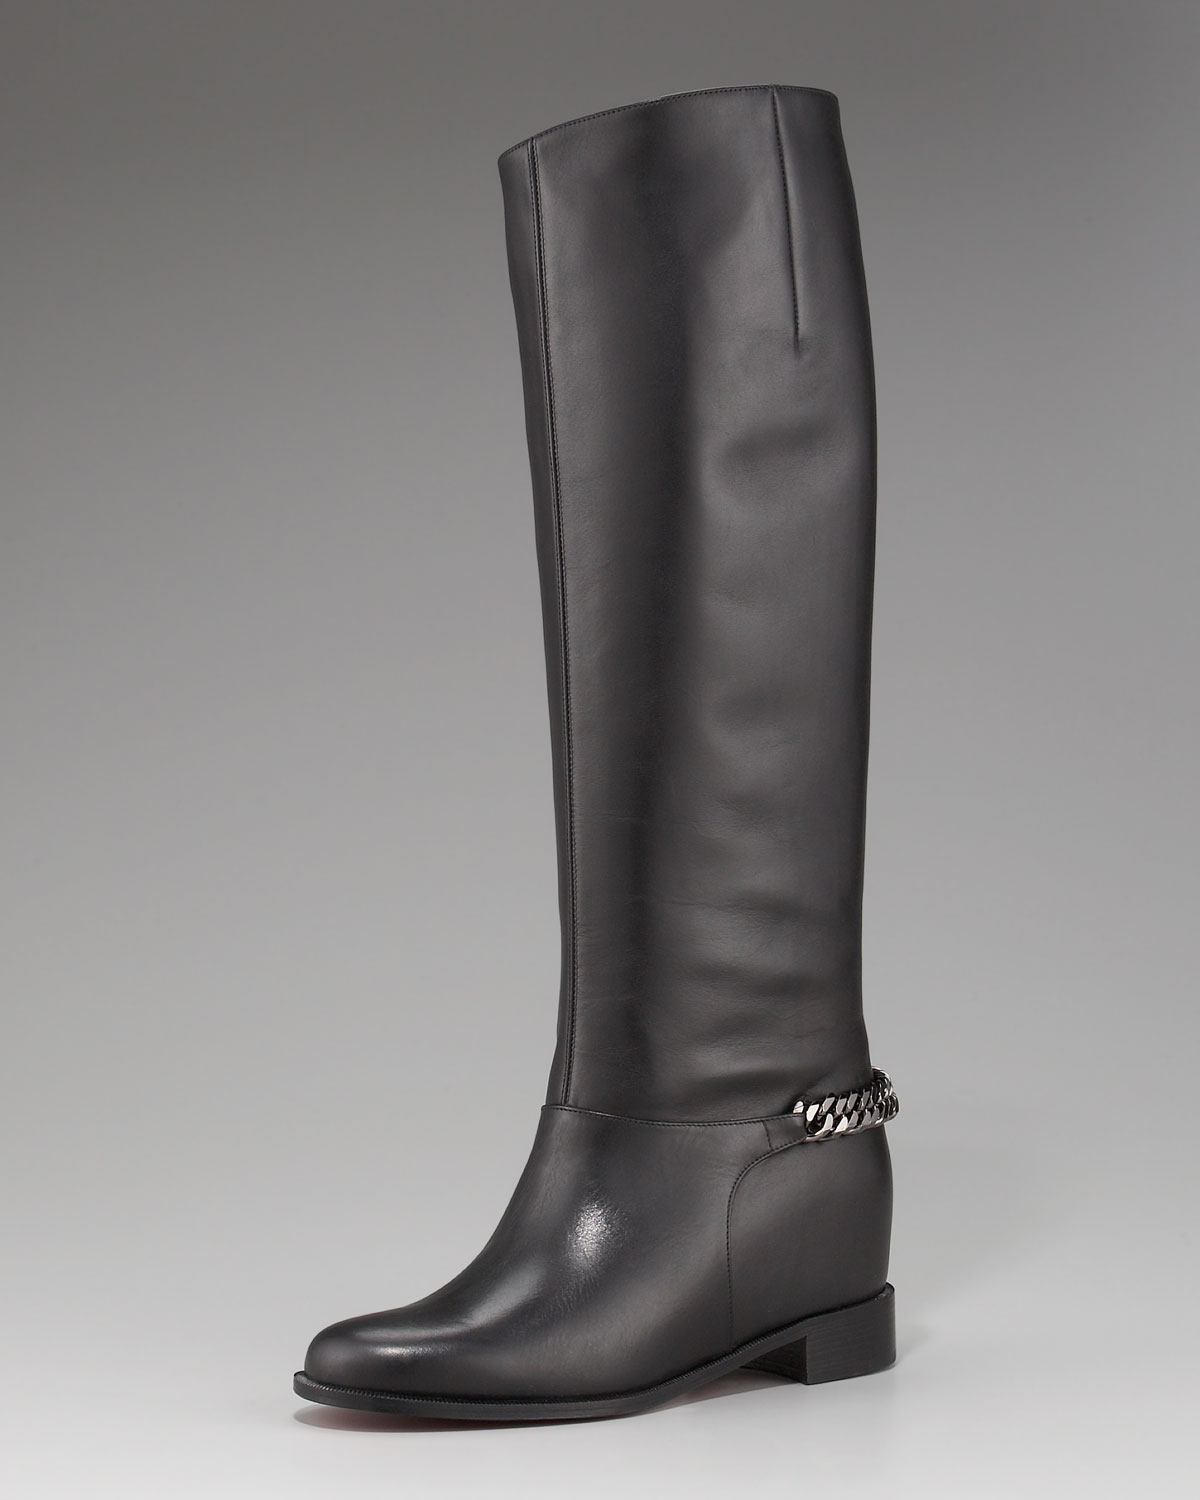 christian louboutin Cate riding boots Black leather chain trim ...